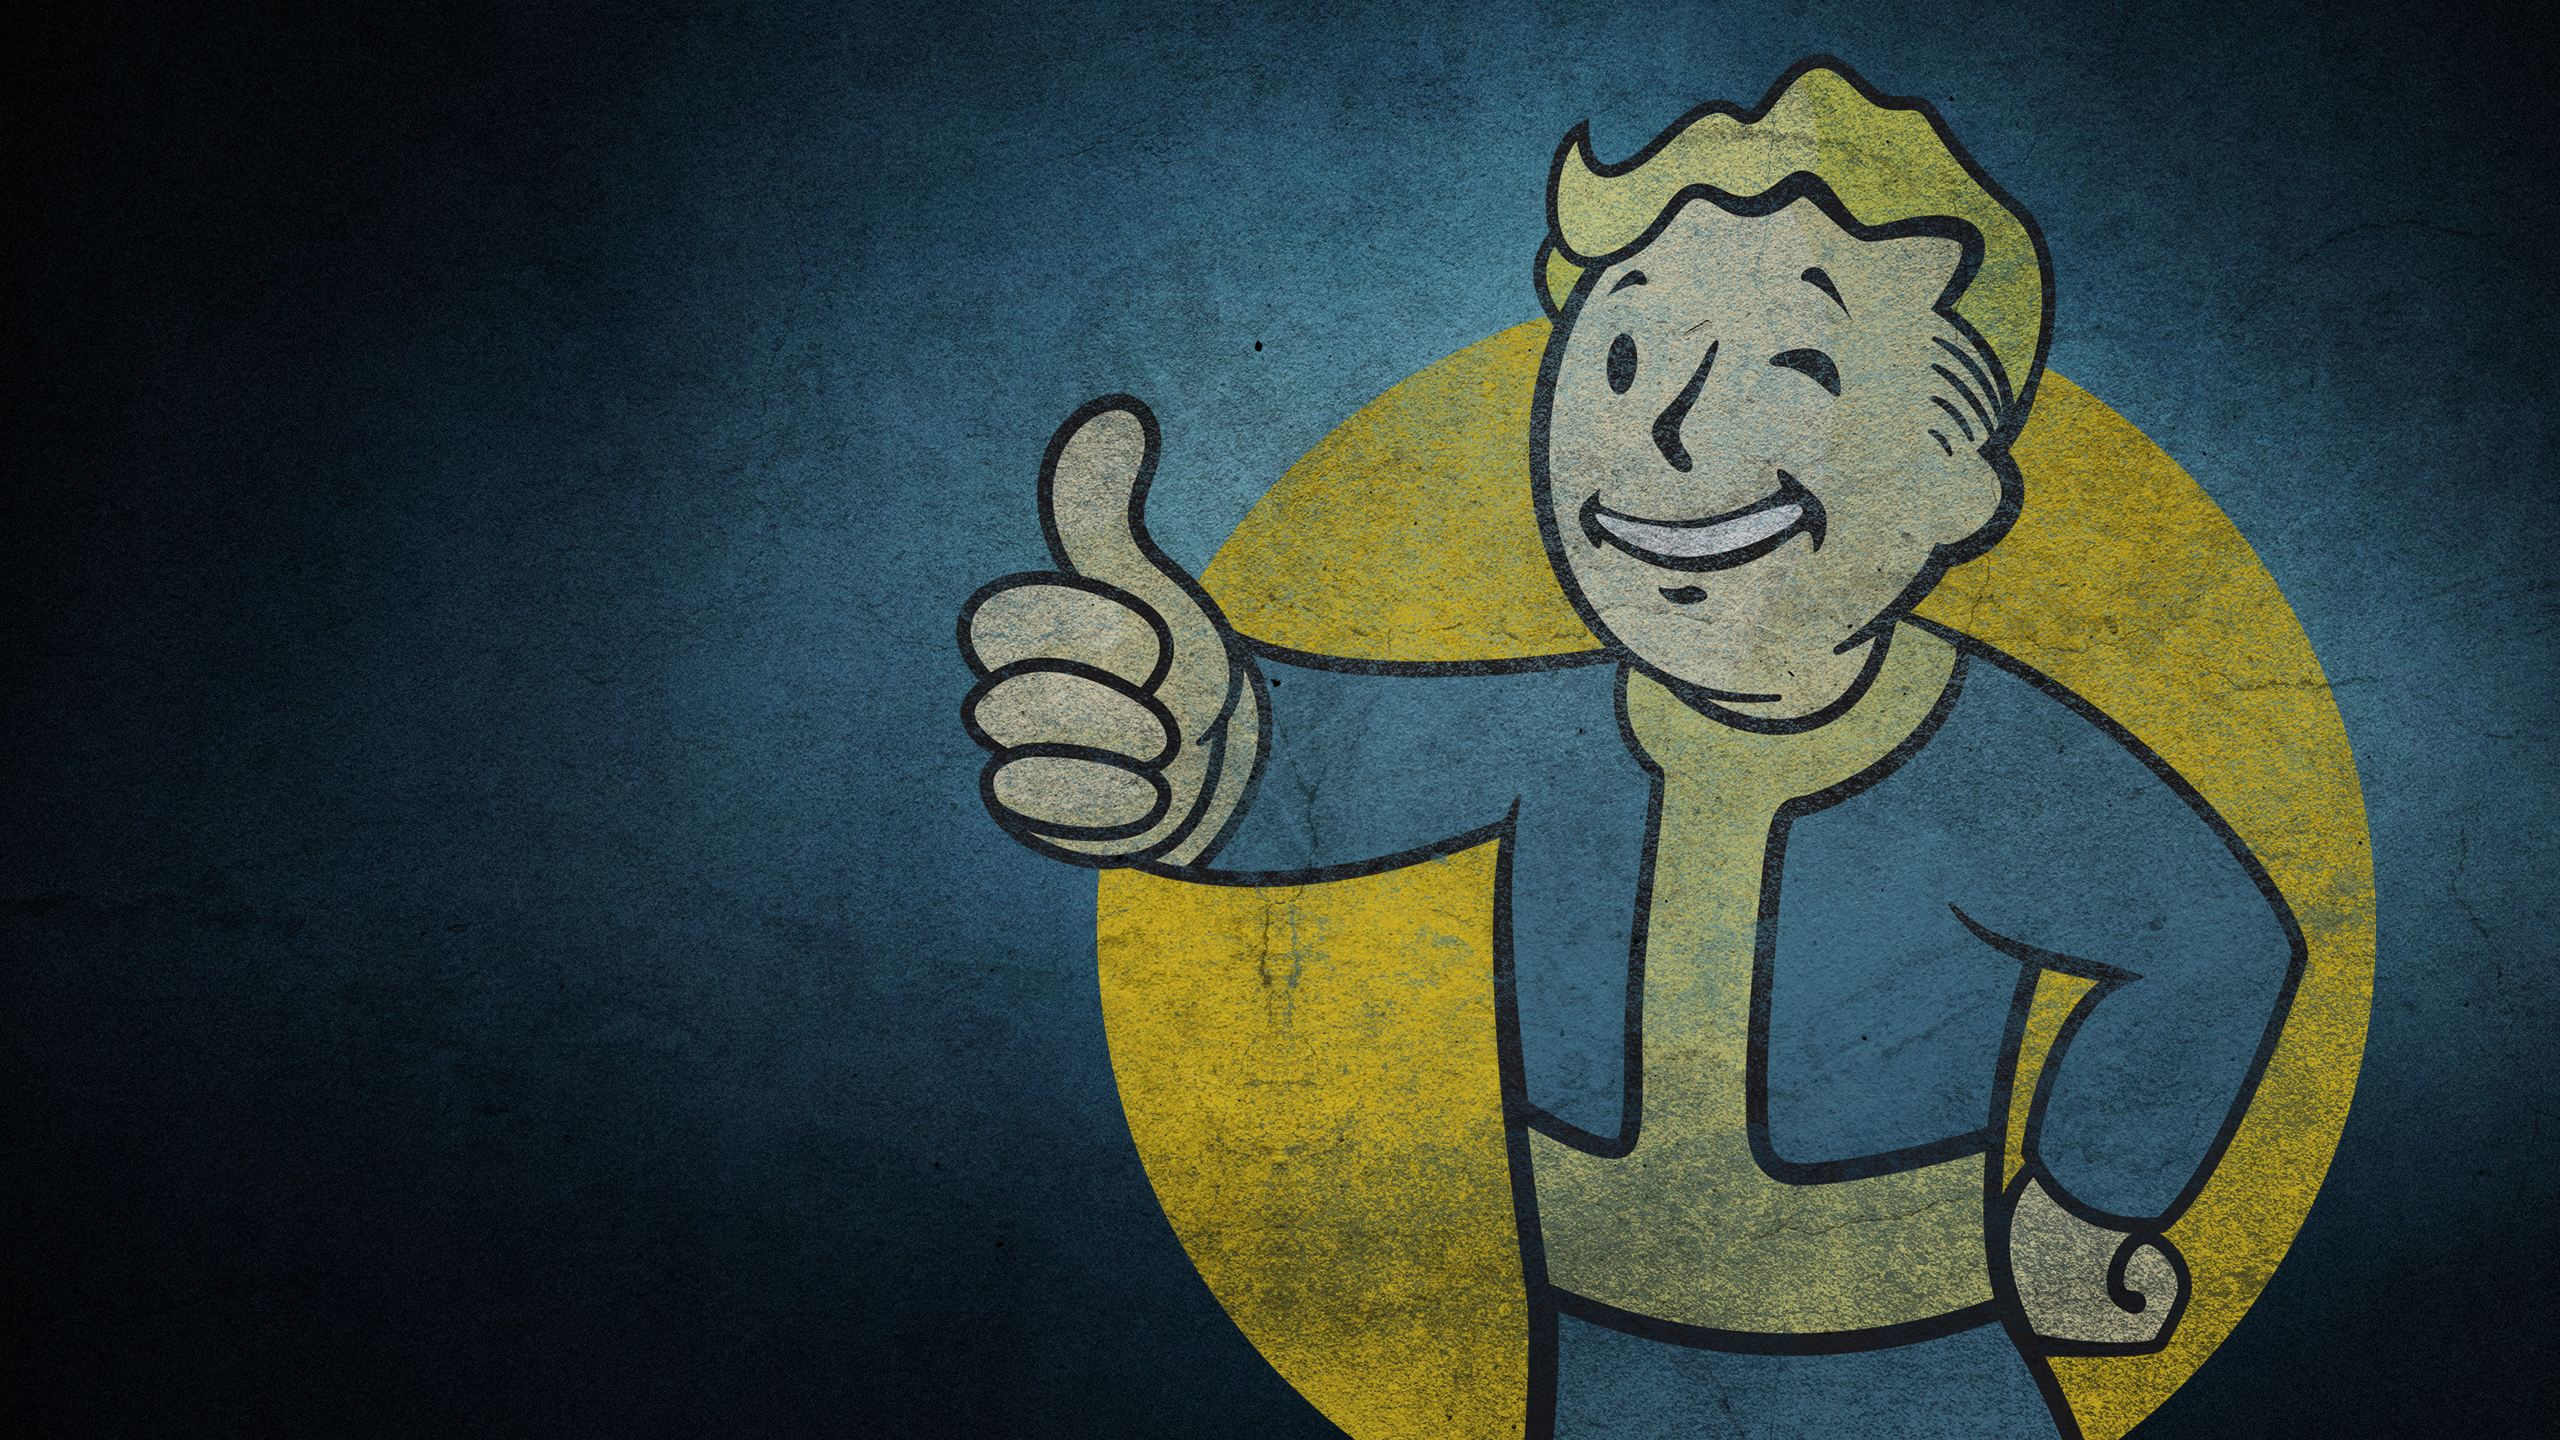 Vault Boy Fallout Fallout 3 Video Games Thumbs Up 2560x1440